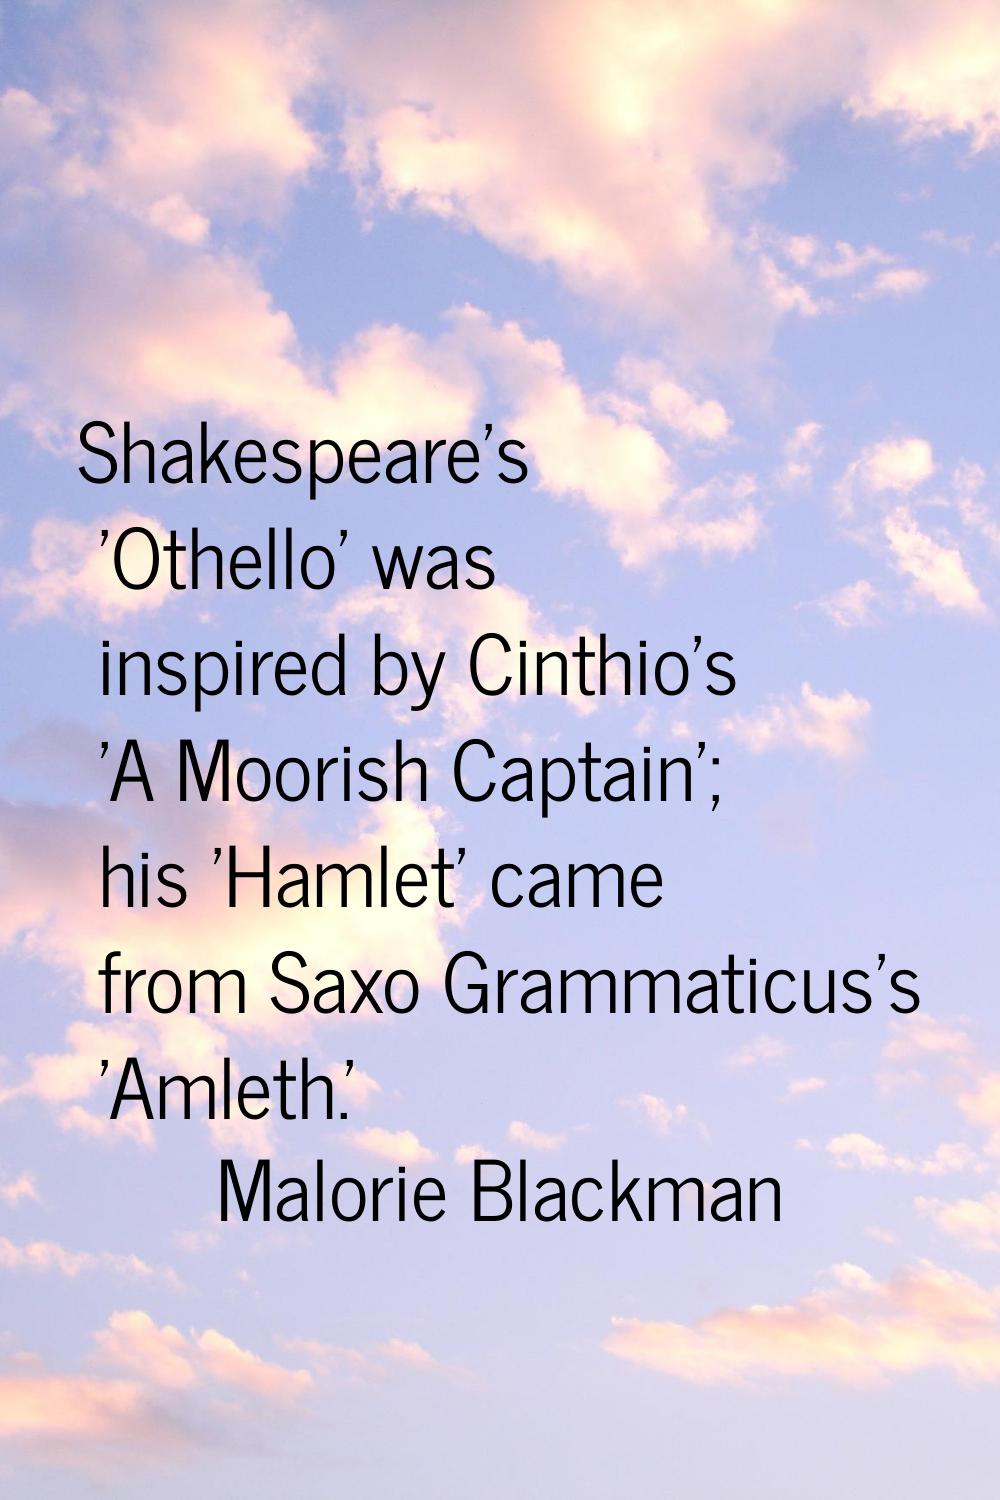 Shakespeare's 'Othello' was inspired by Cinthio's 'A Moorish Captain'; his 'Hamlet' came from Saxo 